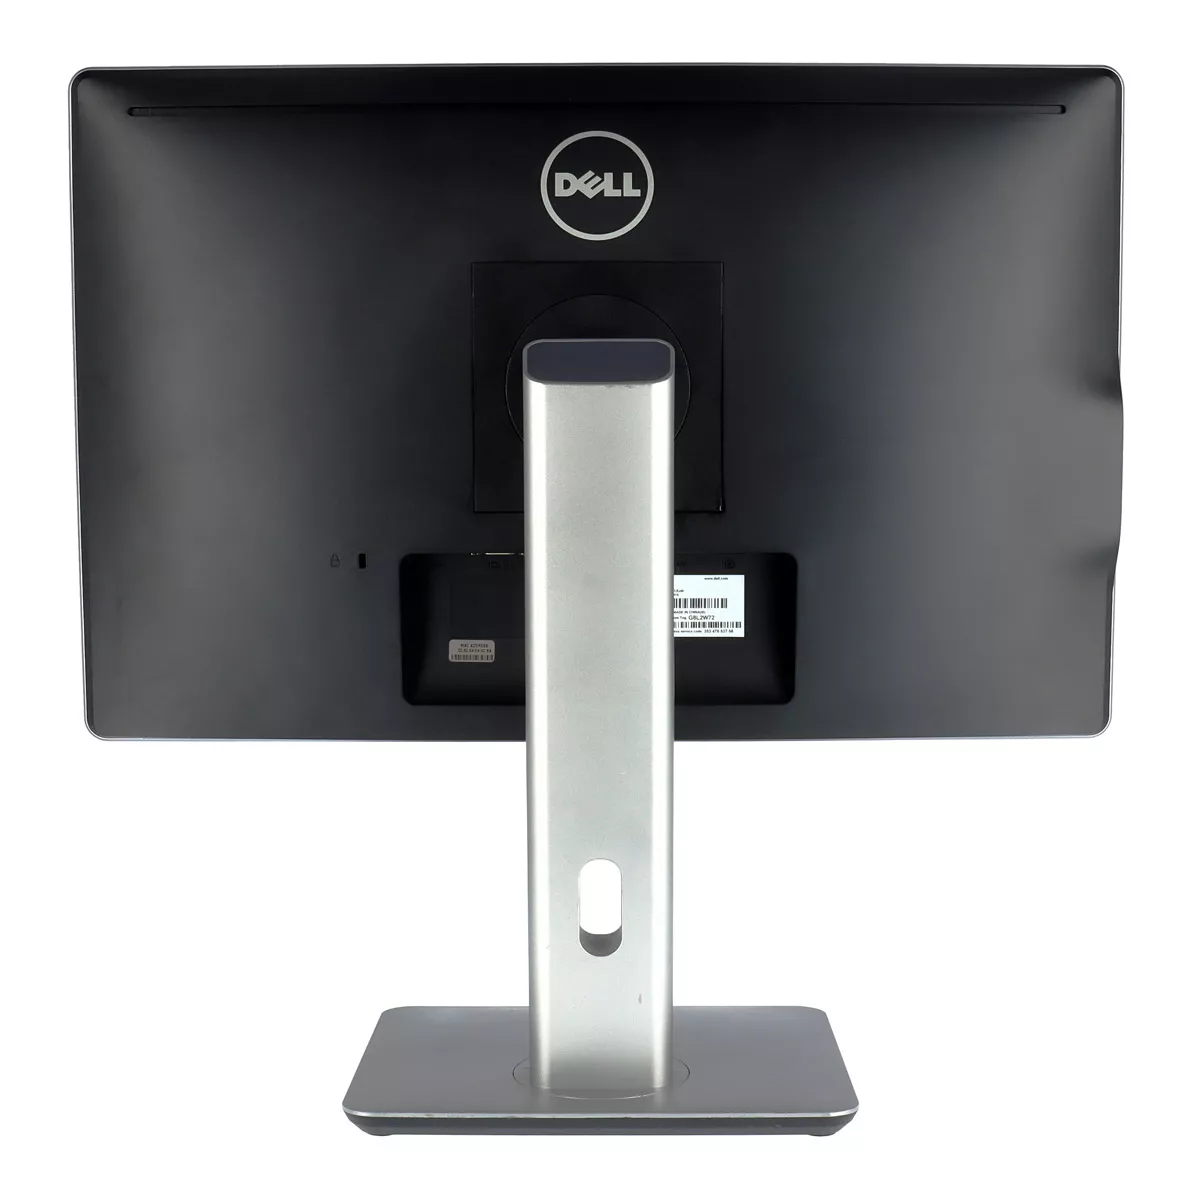 All-in-One Dell Wyse 5040 Thin Client 21,5 Zoll B-Ware